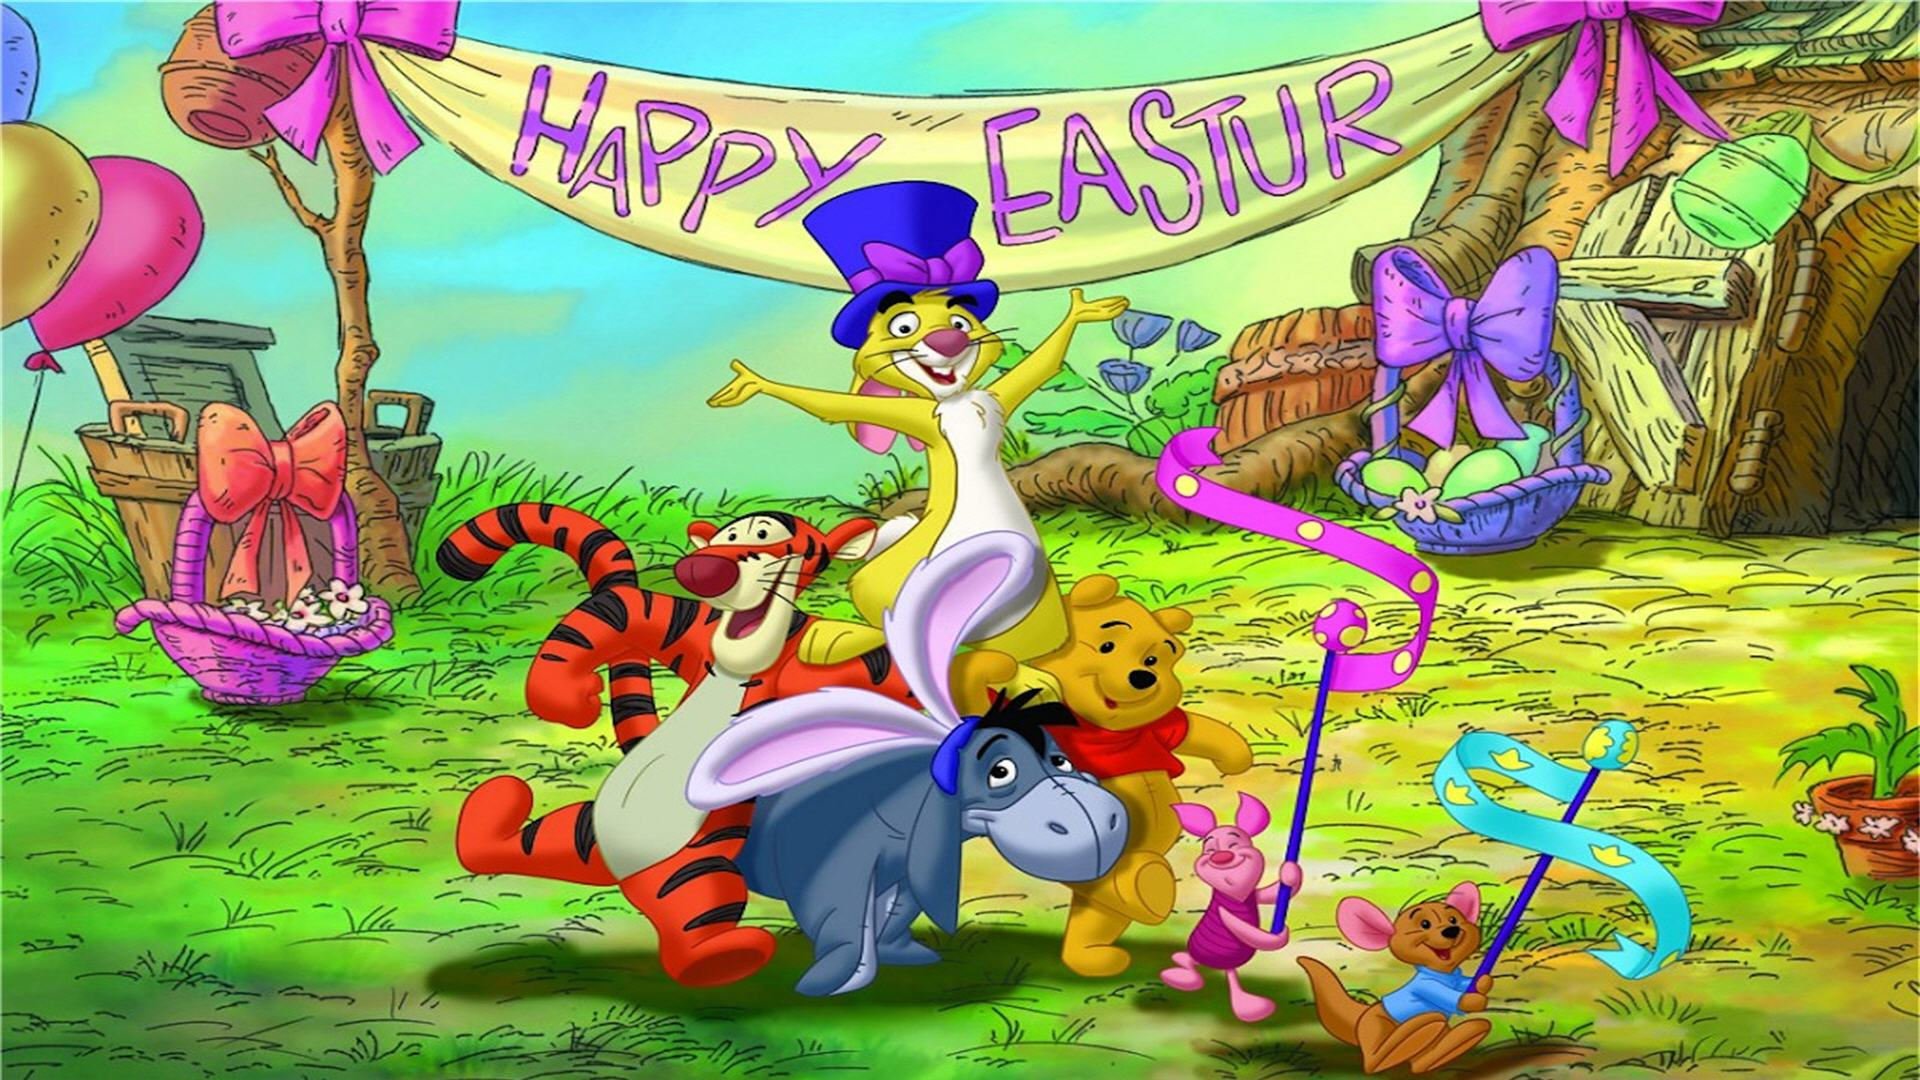 Winnie The Pooh Easter wallpaper 178469 1920x1080